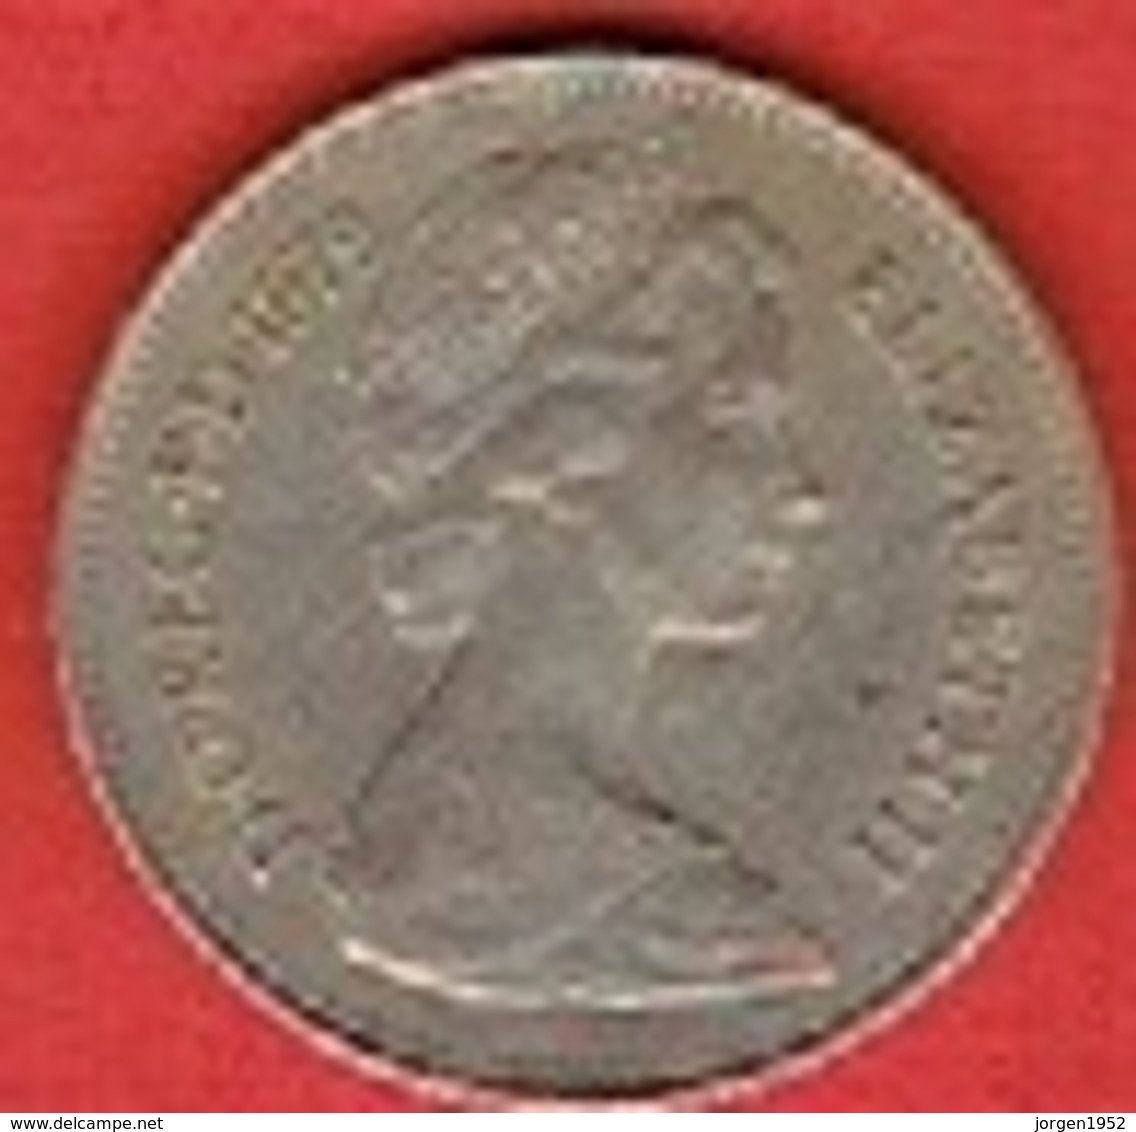 GREAT BRITAIN  # 5 New Pence - Elizabeth II  FROM 1979 - 5 Pence & 5 New Pence